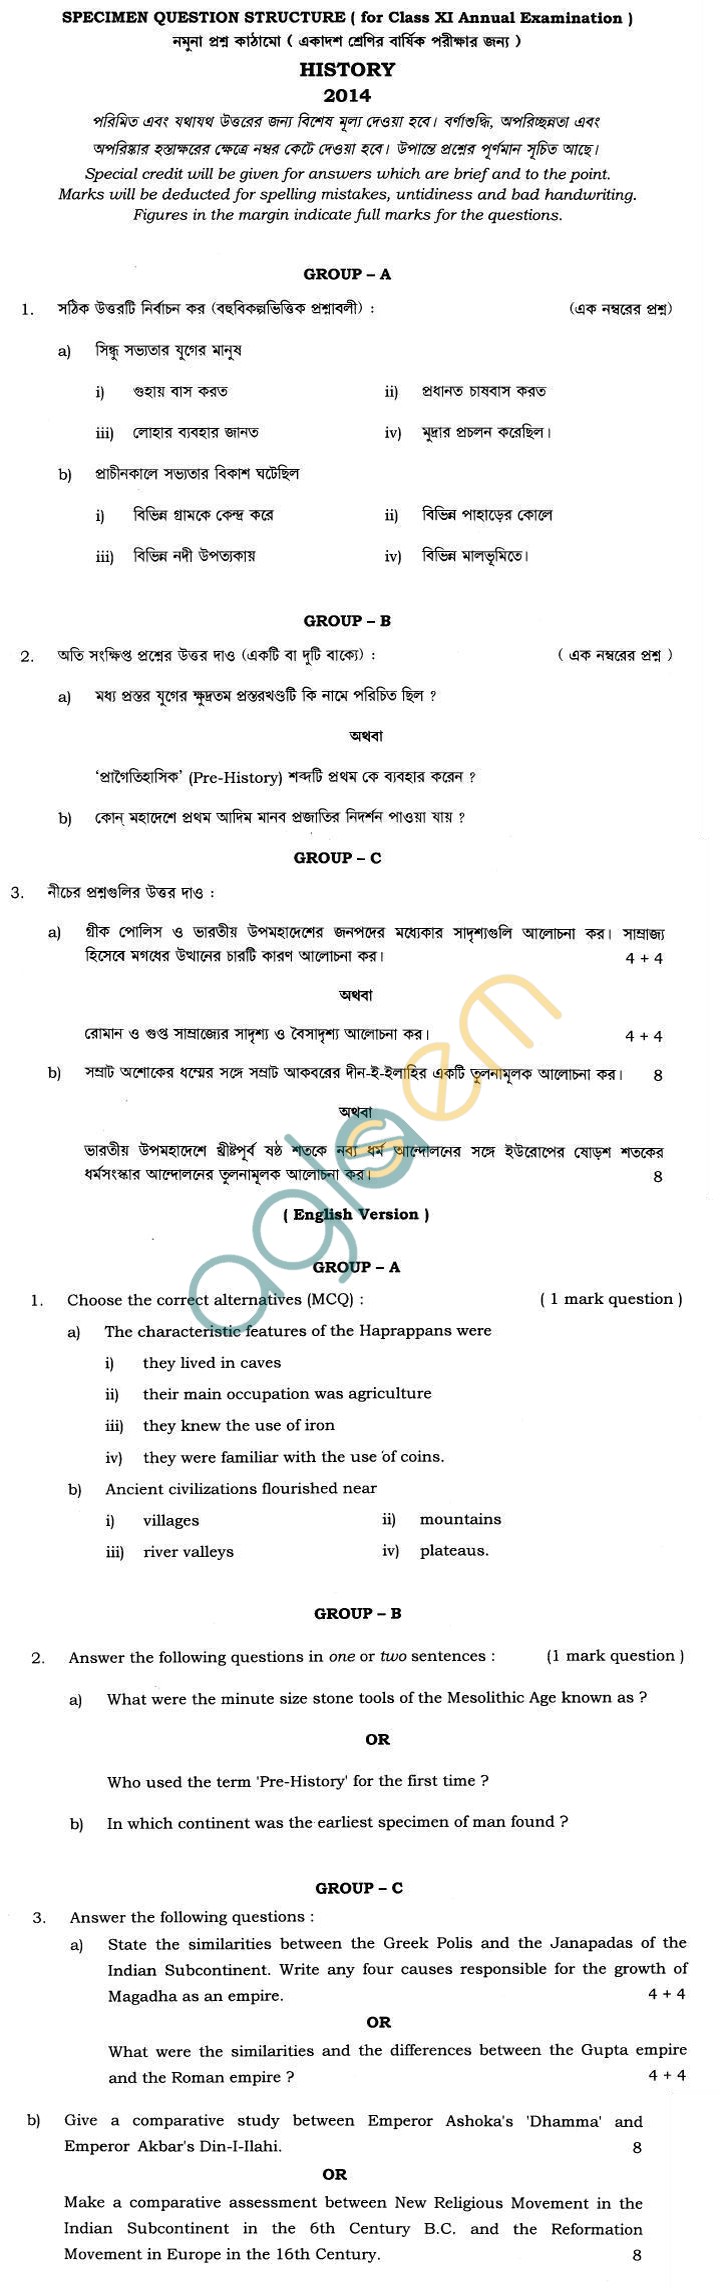 West Bengal Board Sample Question Paper for Class 11 - History/